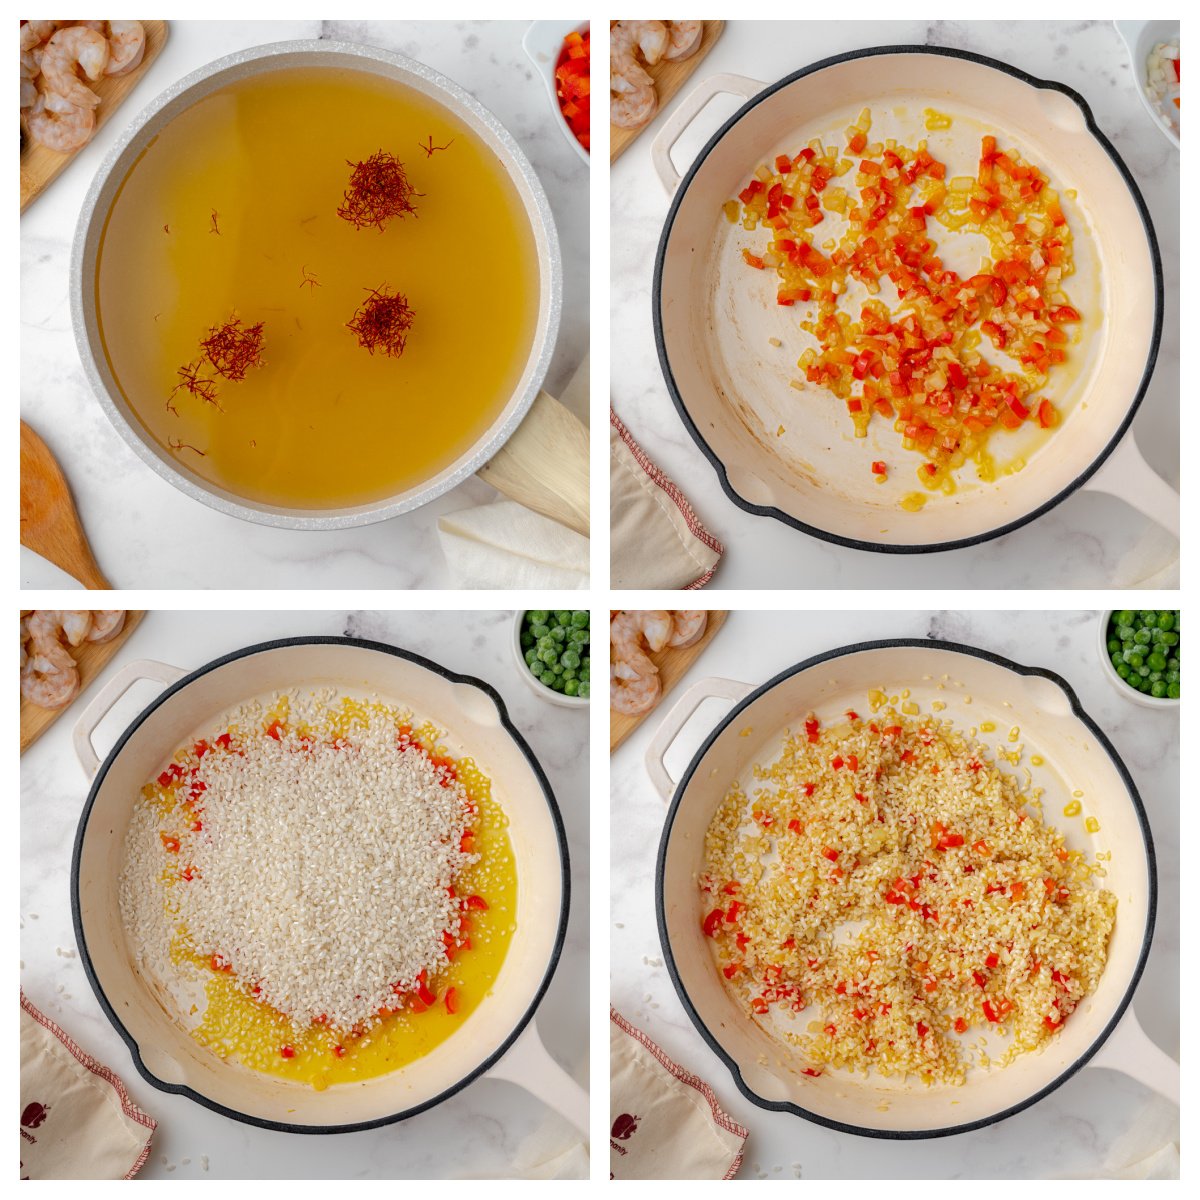 step-by-step images of how to make paella- soften saffron, make sofrito and toast rice 